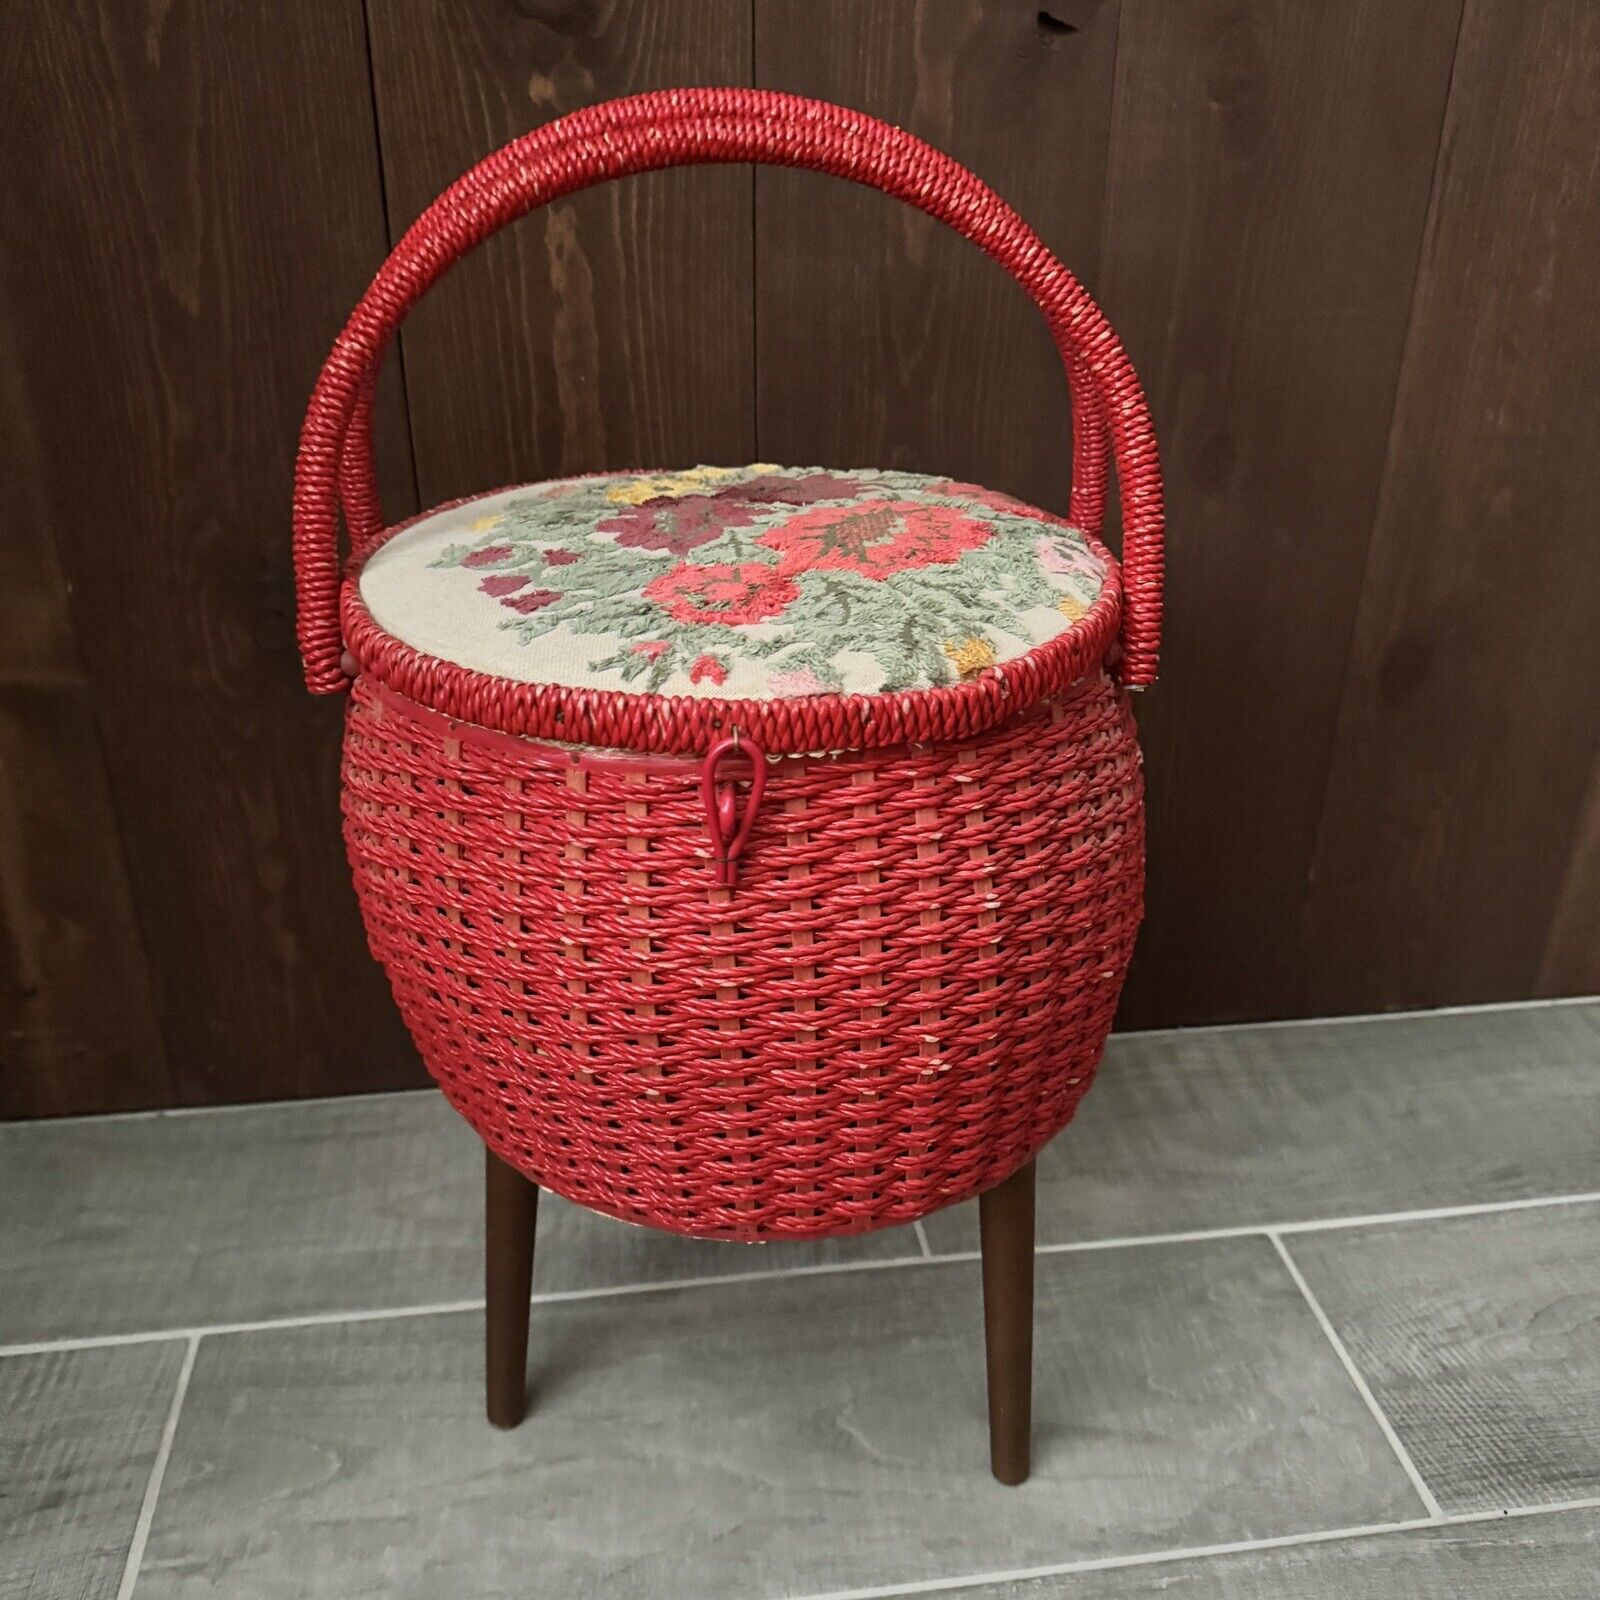 Vtg Wicker Sewing Basket With Legs Needlepoint Floral Red Exclusively For Singer